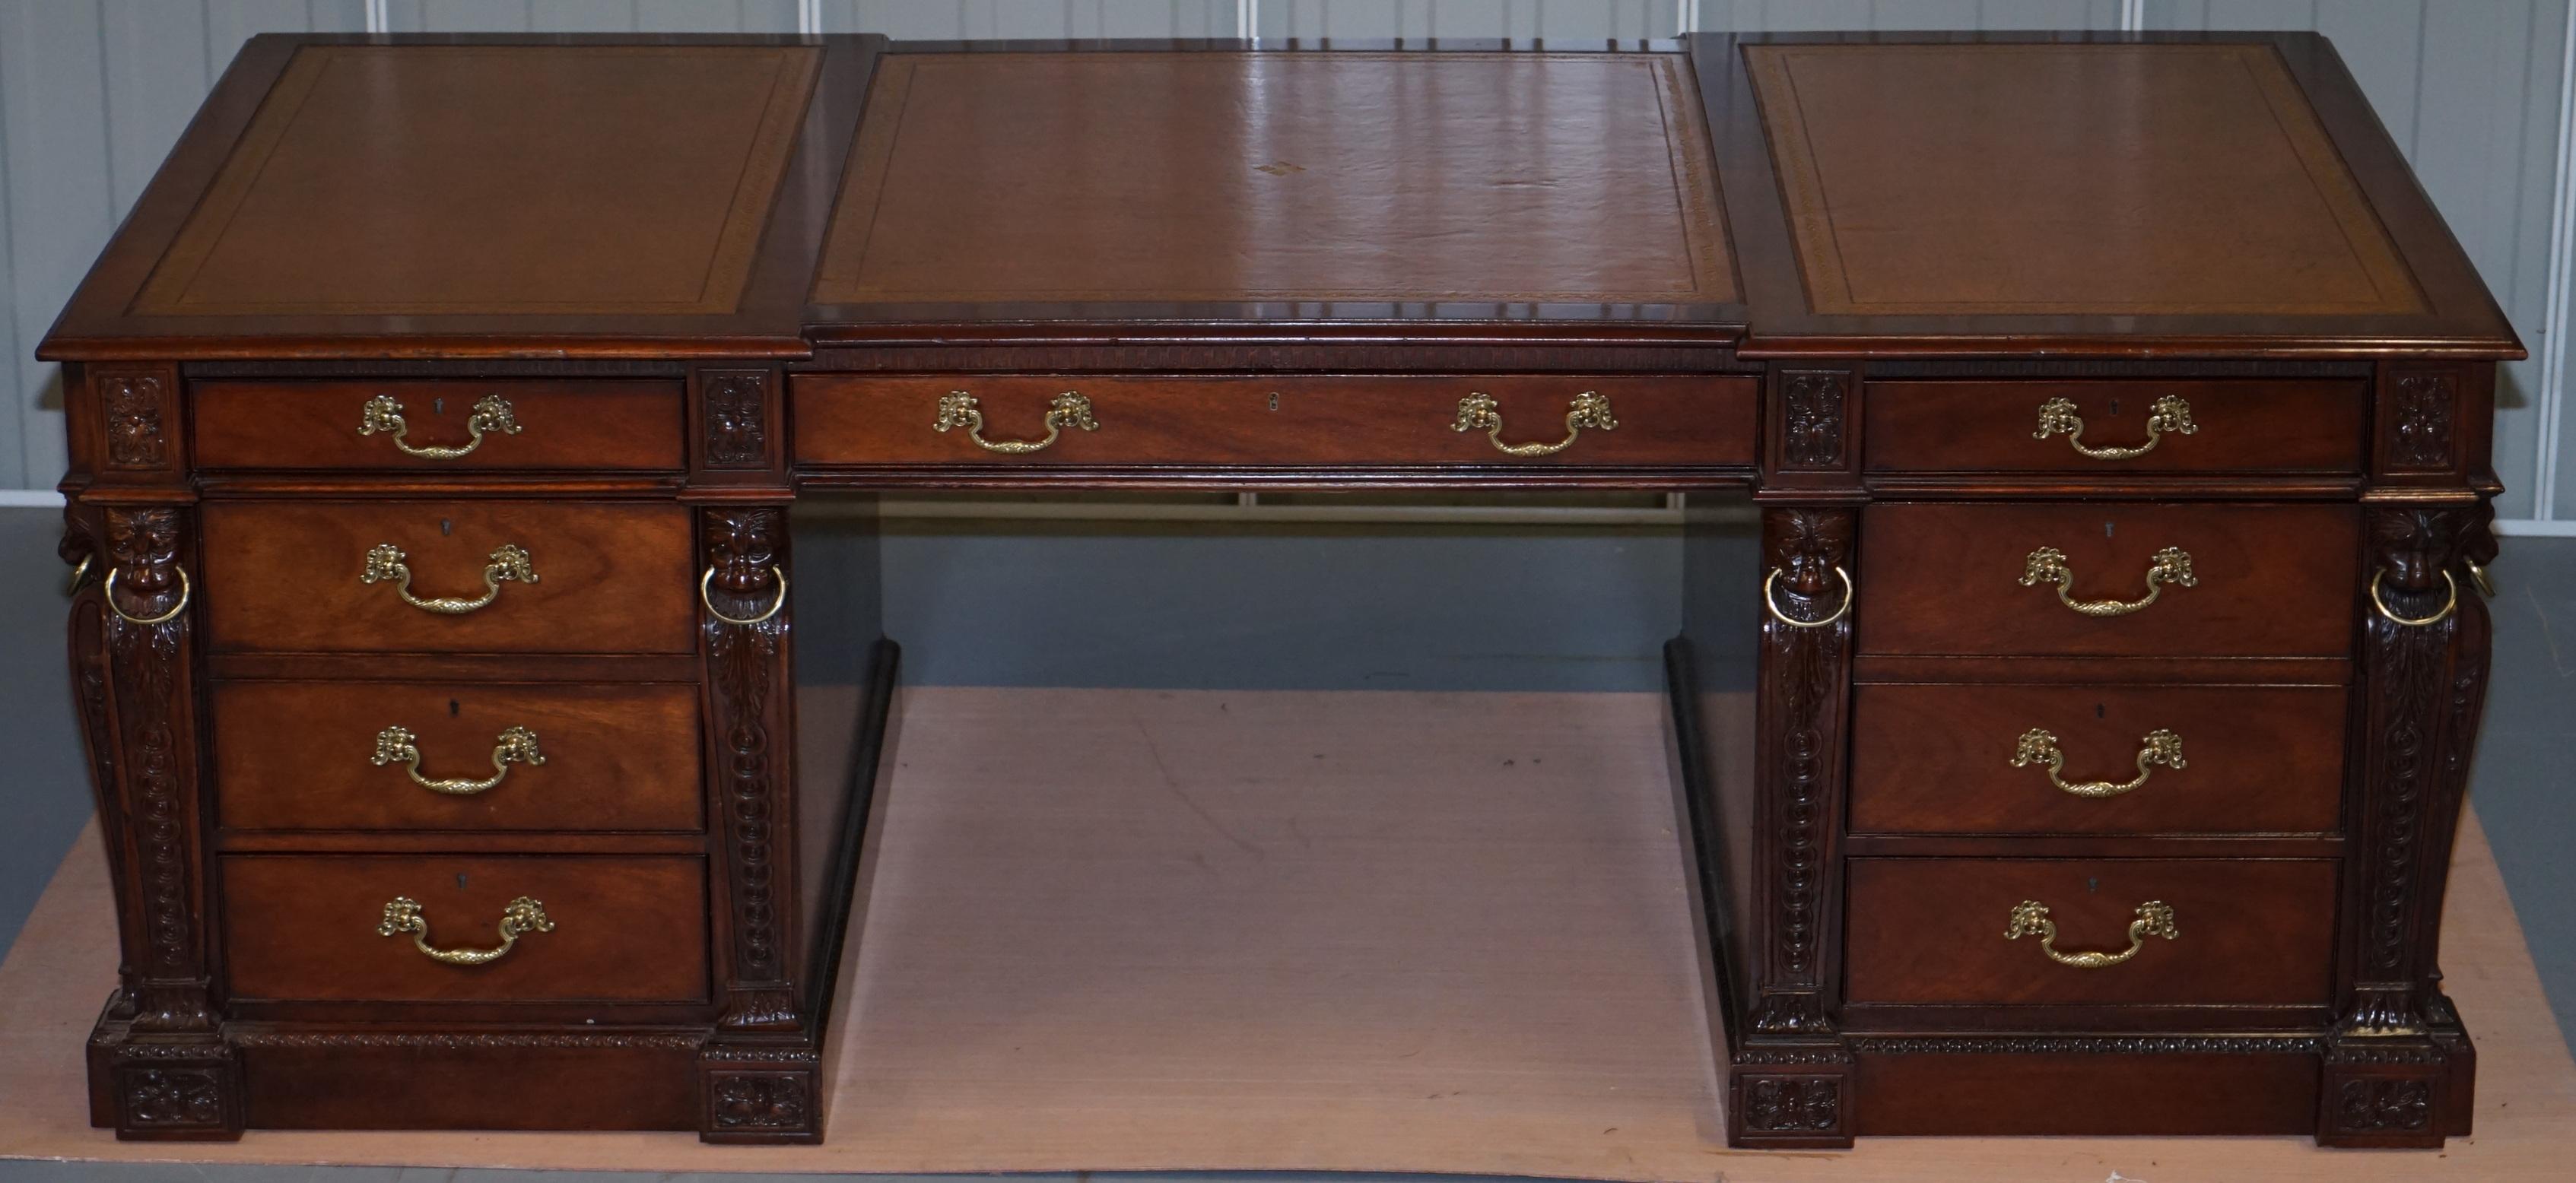 We are delighted to offer for sale this absolutely monumental Baker Furniture Stately Homes edition, William Kent 1740, Thomas Chippendale, twin pedestal double sided partners desk RRP £73,000

Where to begin, this desk is absolutely amazing, it